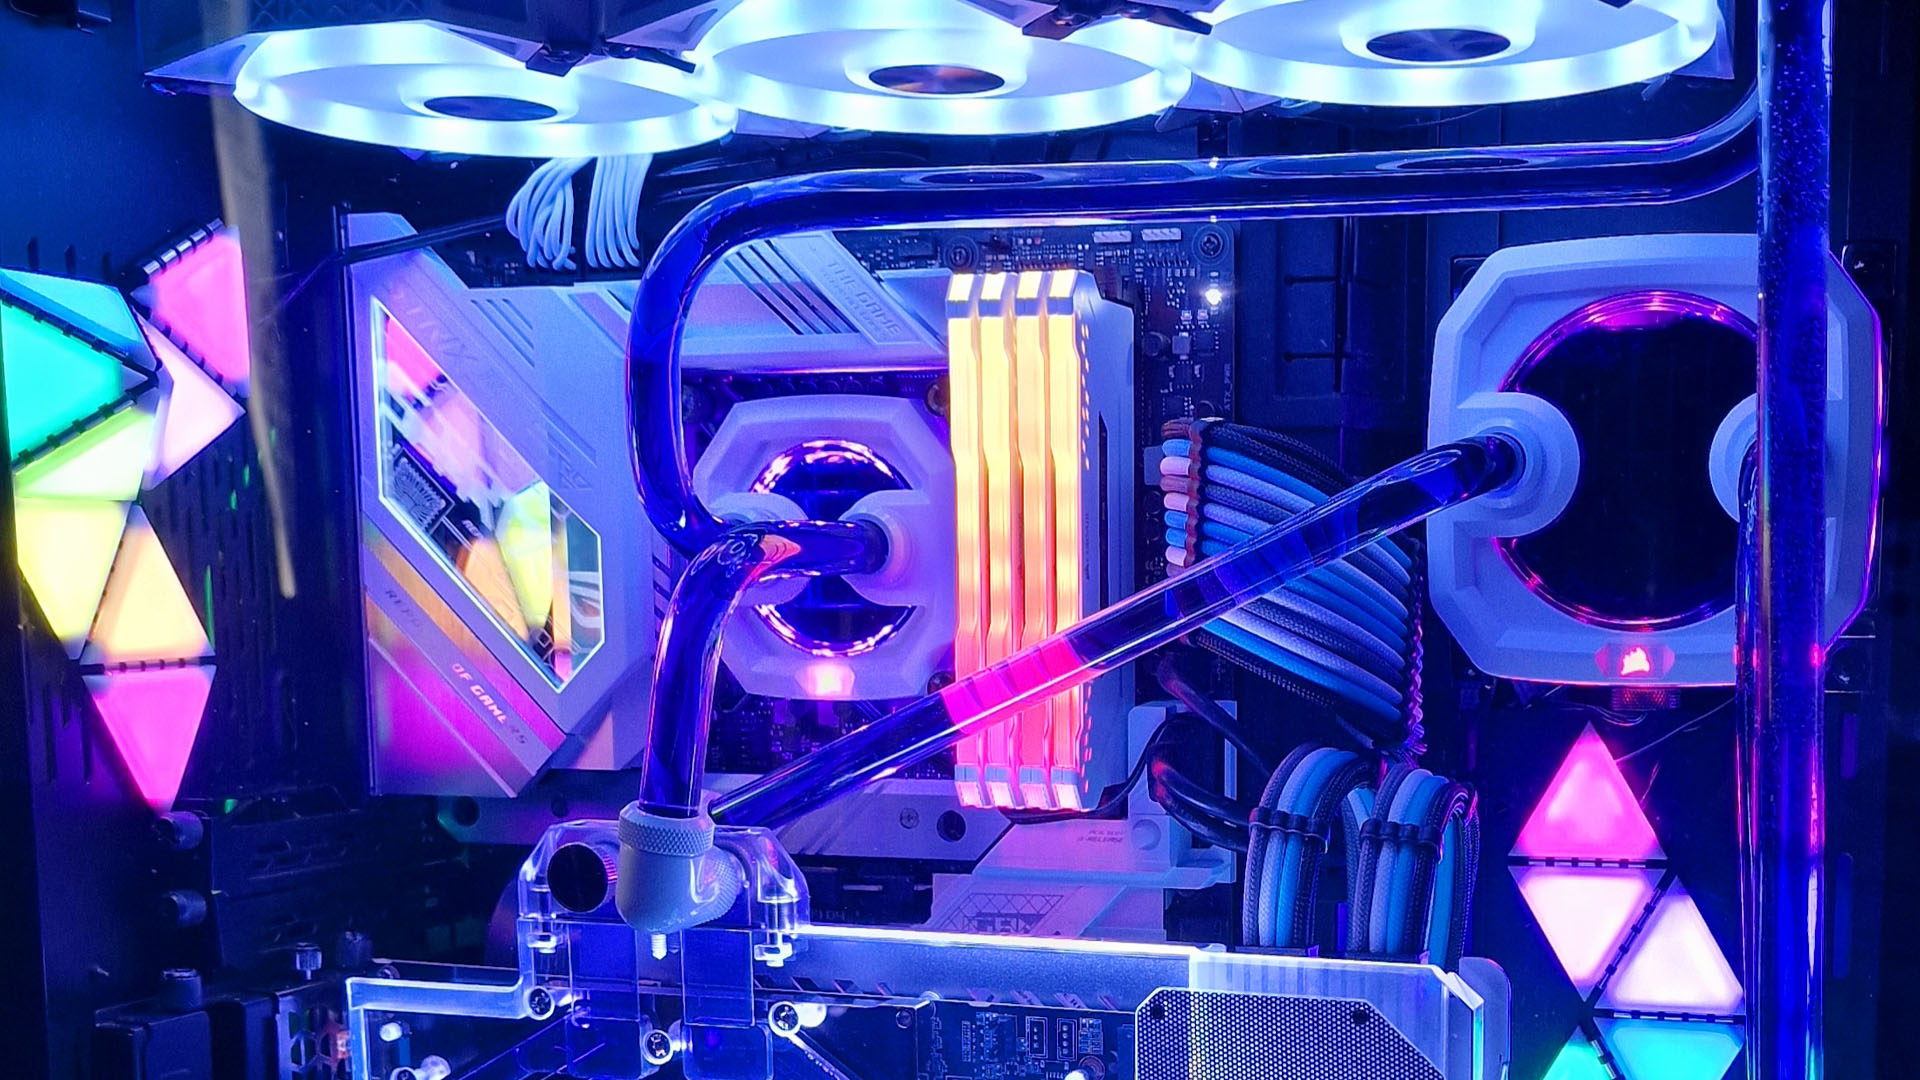 How to Add LED Lights to a Desktop PC Tower: 6 Simple Steps